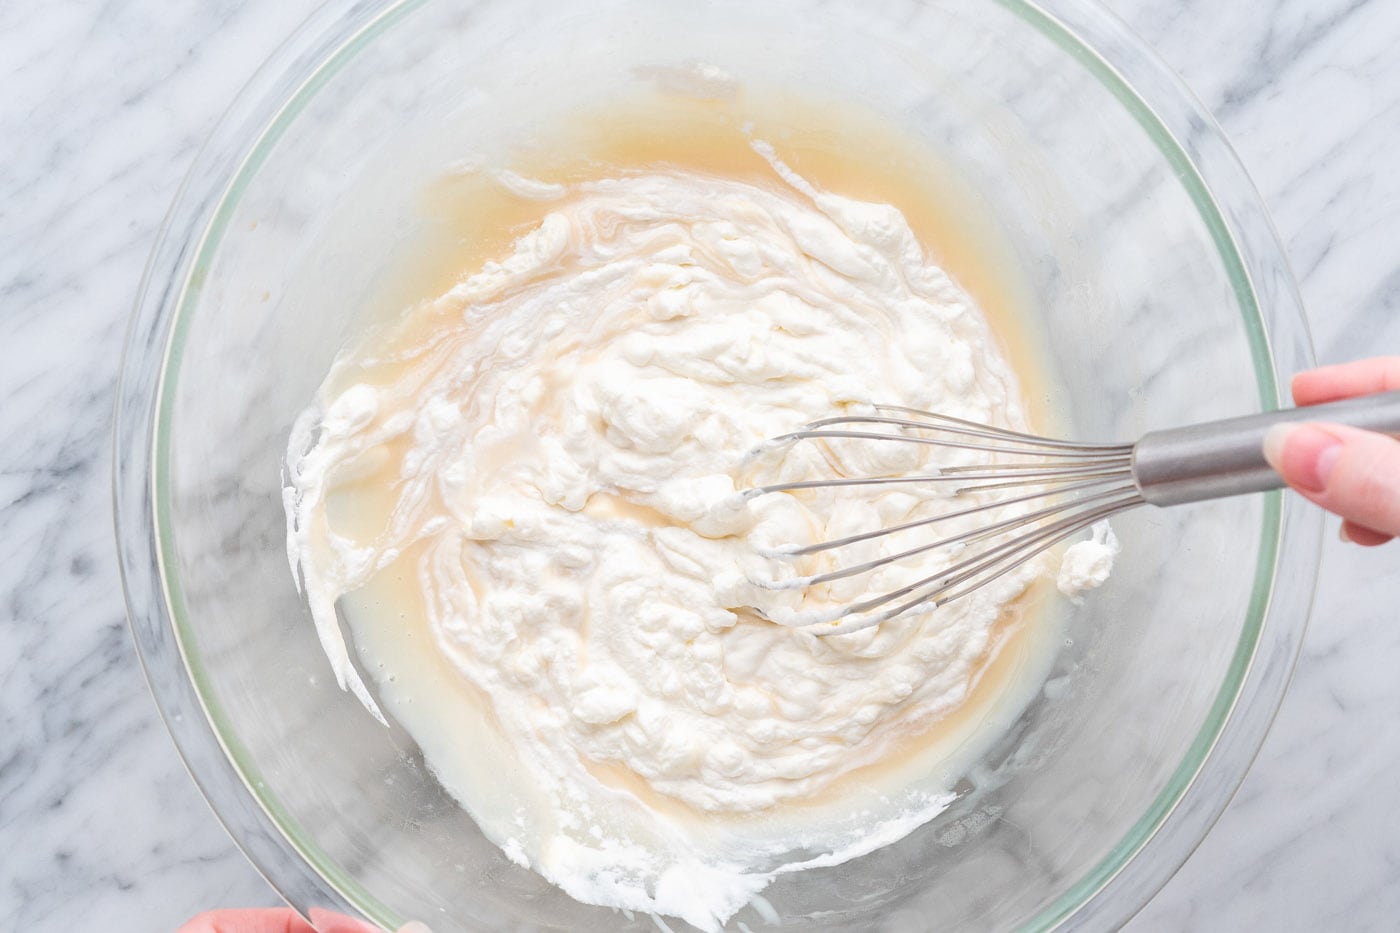 whisking no churn ice cream together in a bowl